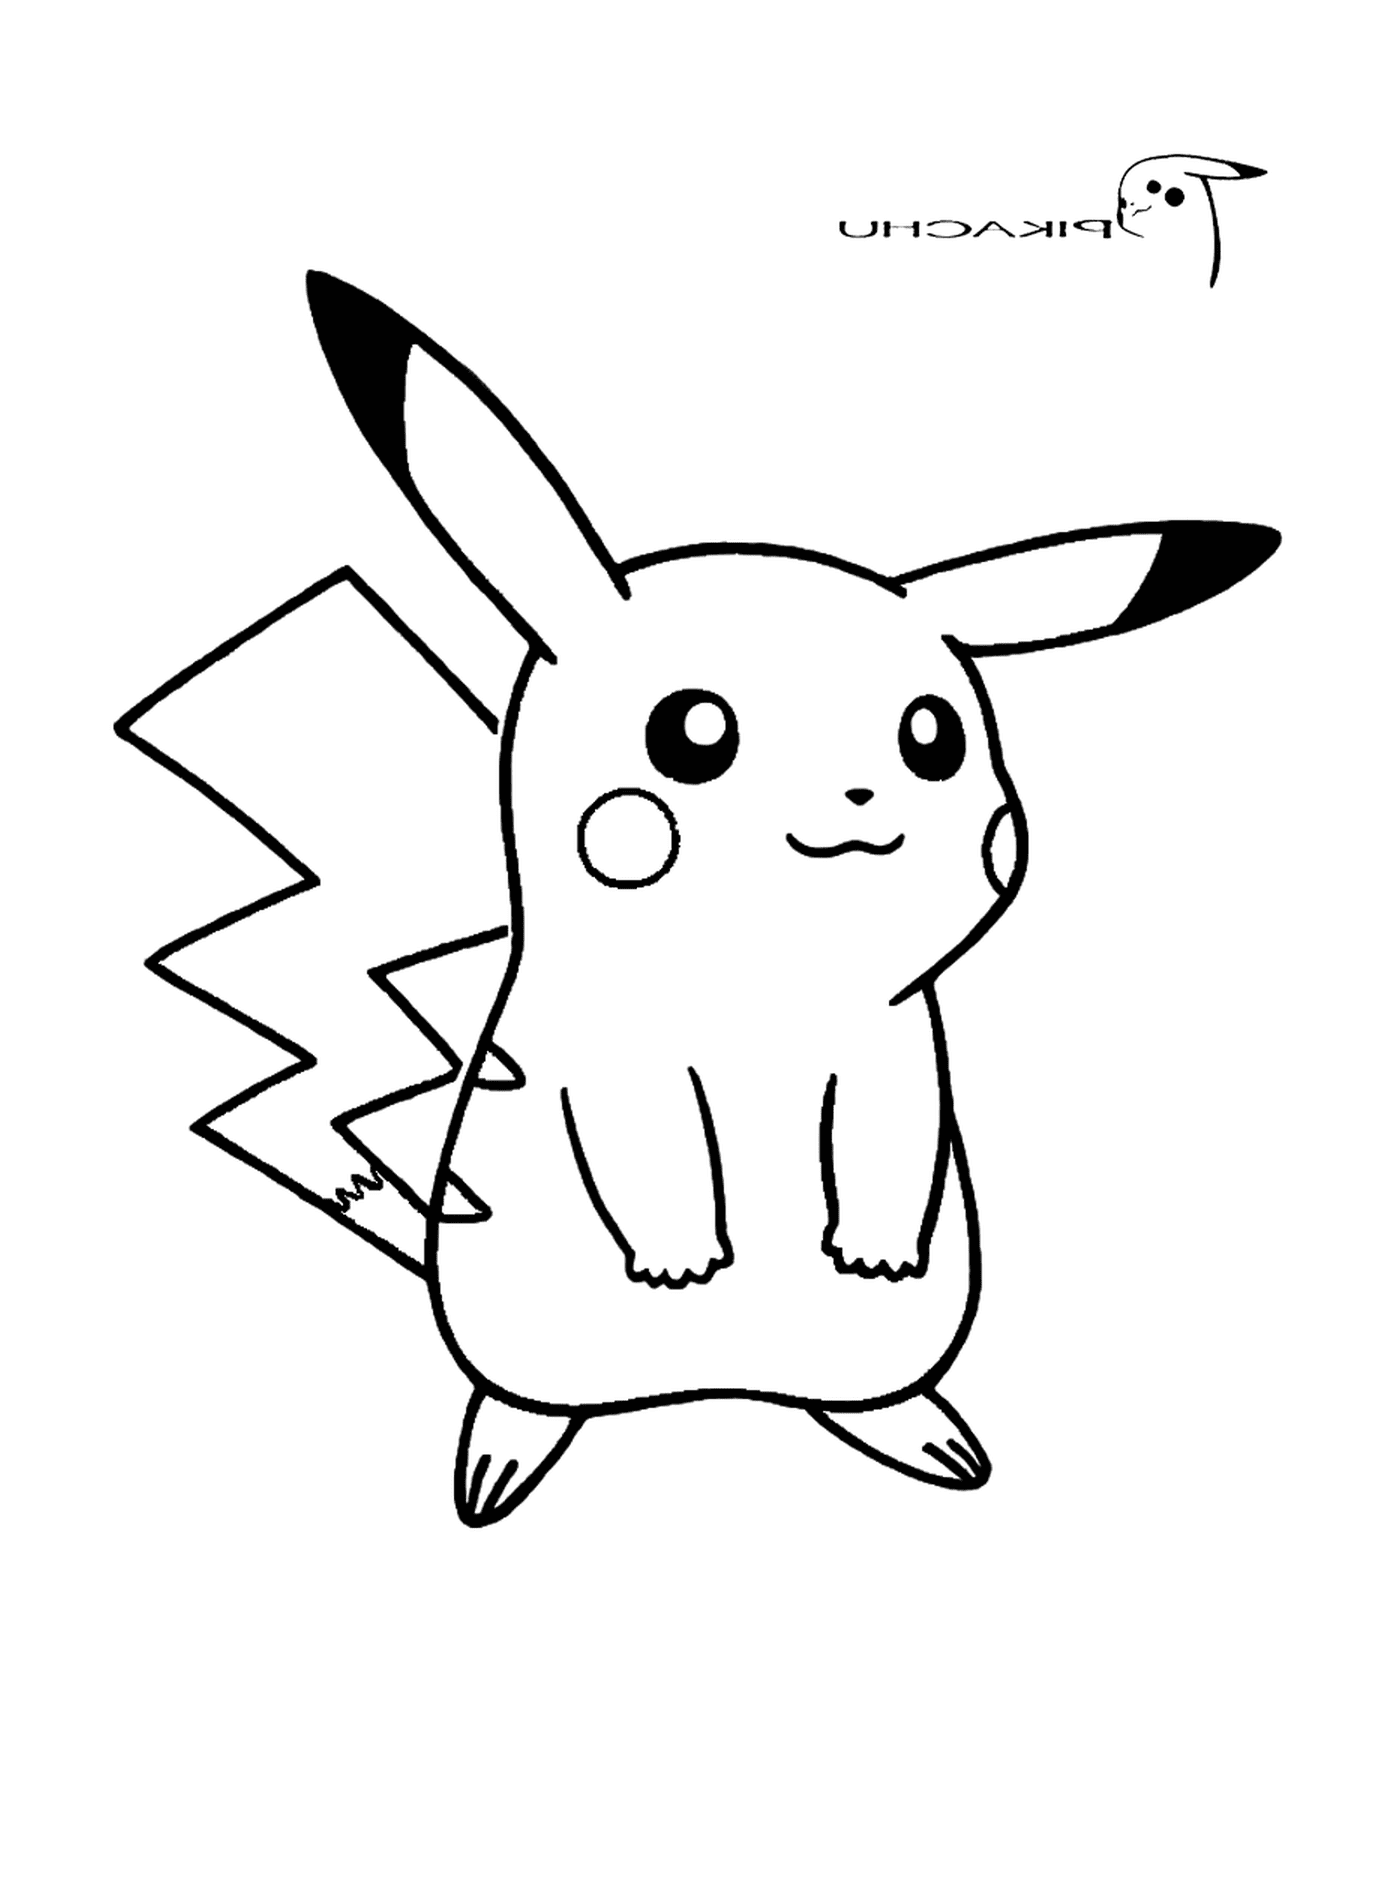  Pikachu cute and player 